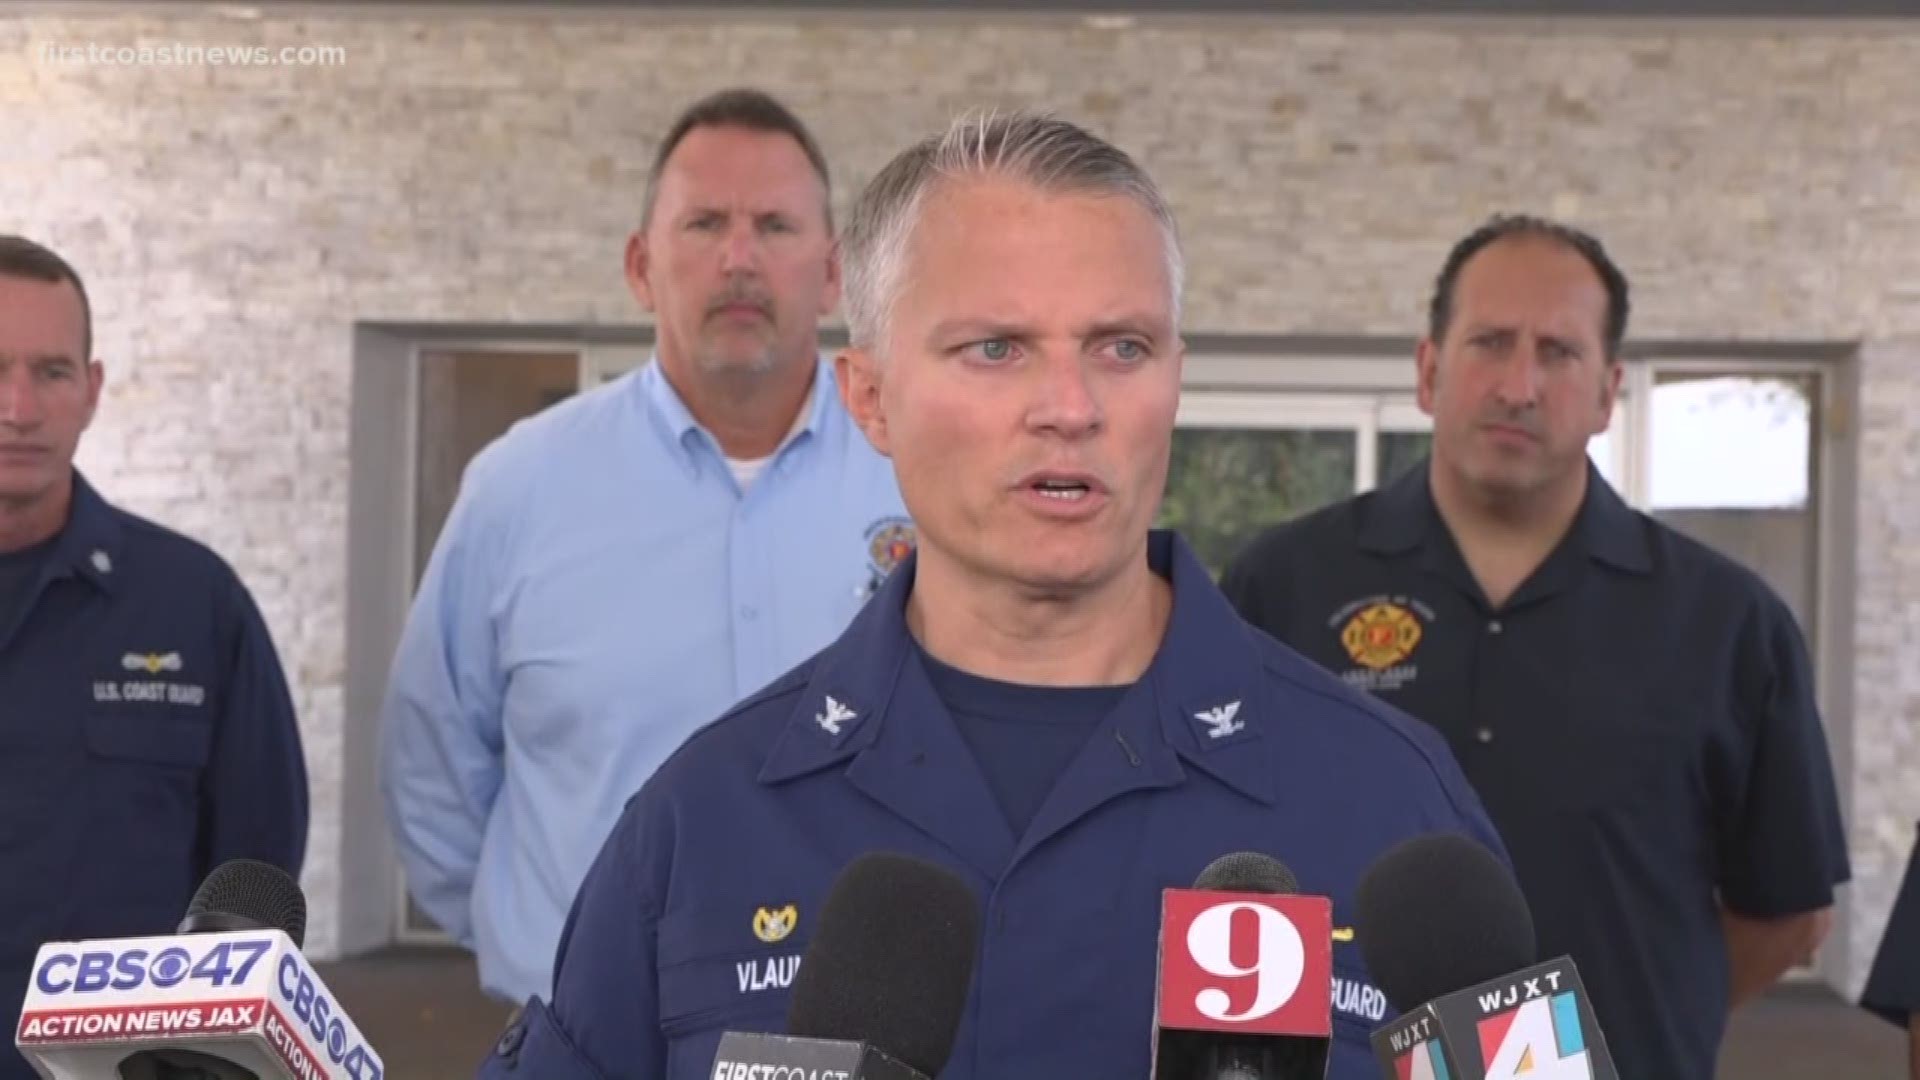 "I’ve made the extremely difficult decision today that we will end the active search tonight at sundown." - U.S. Coast Guard Capt. Mark Vlaun on the search for firemen Brian McCluney and Justin Walker who went missing while boating off the coast of Florida last week.